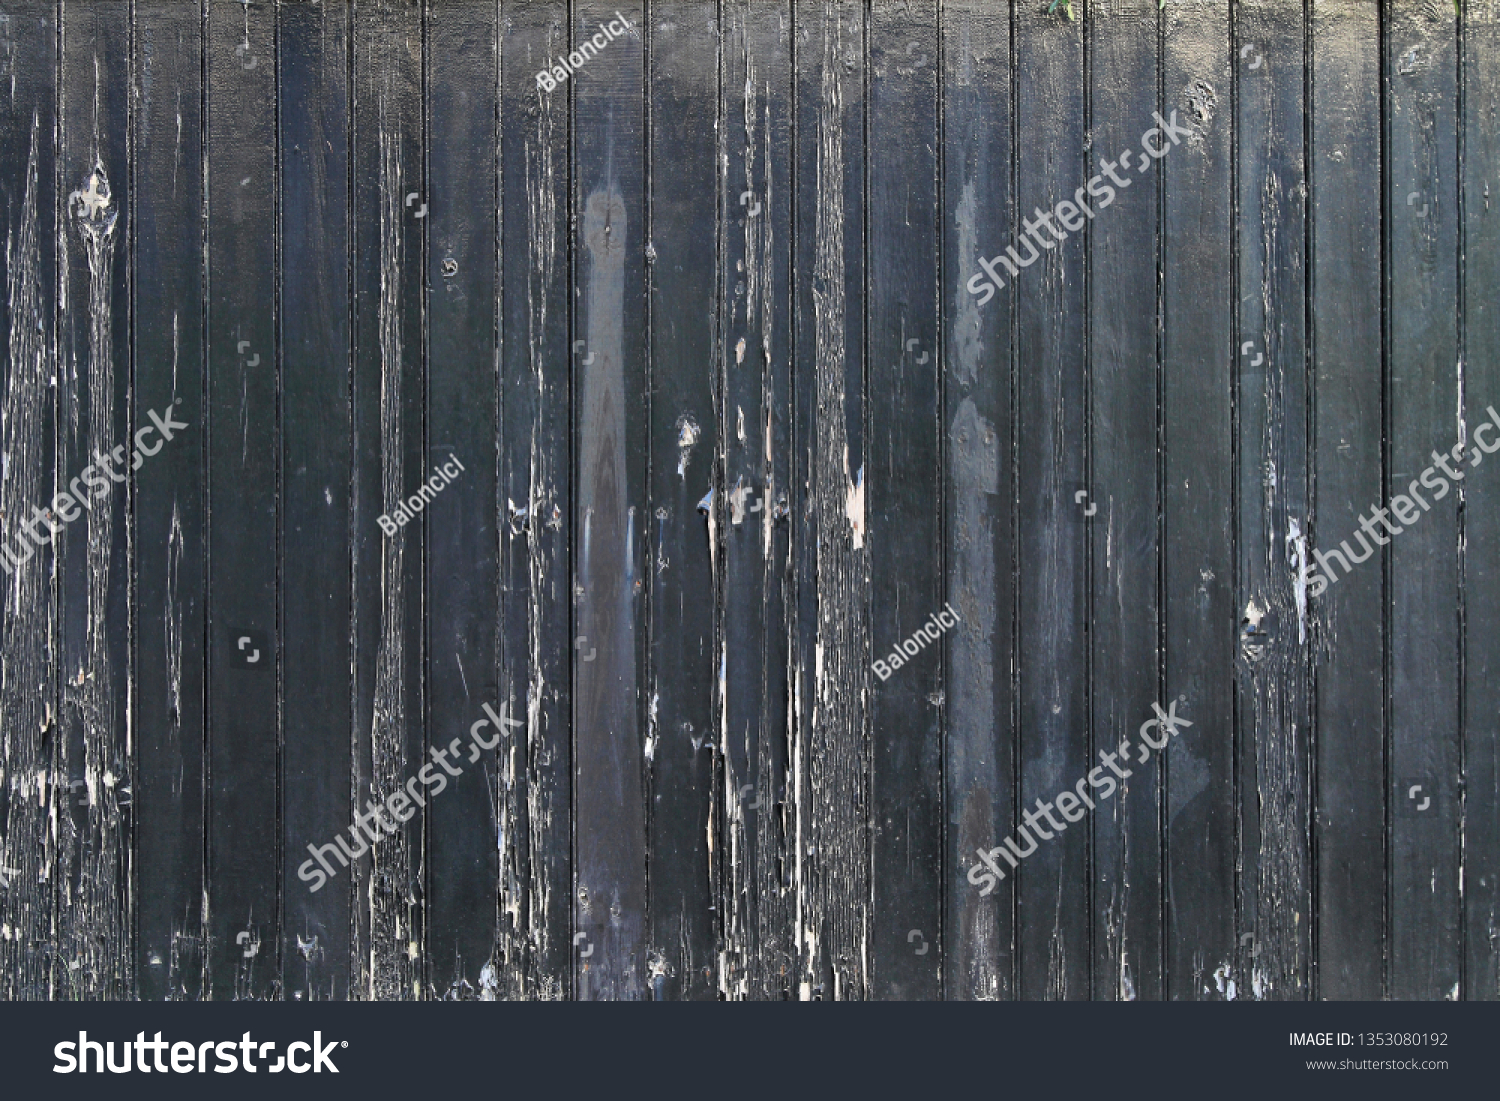 Very Old Decayed Damaged Black Wooden Fence #1353080192